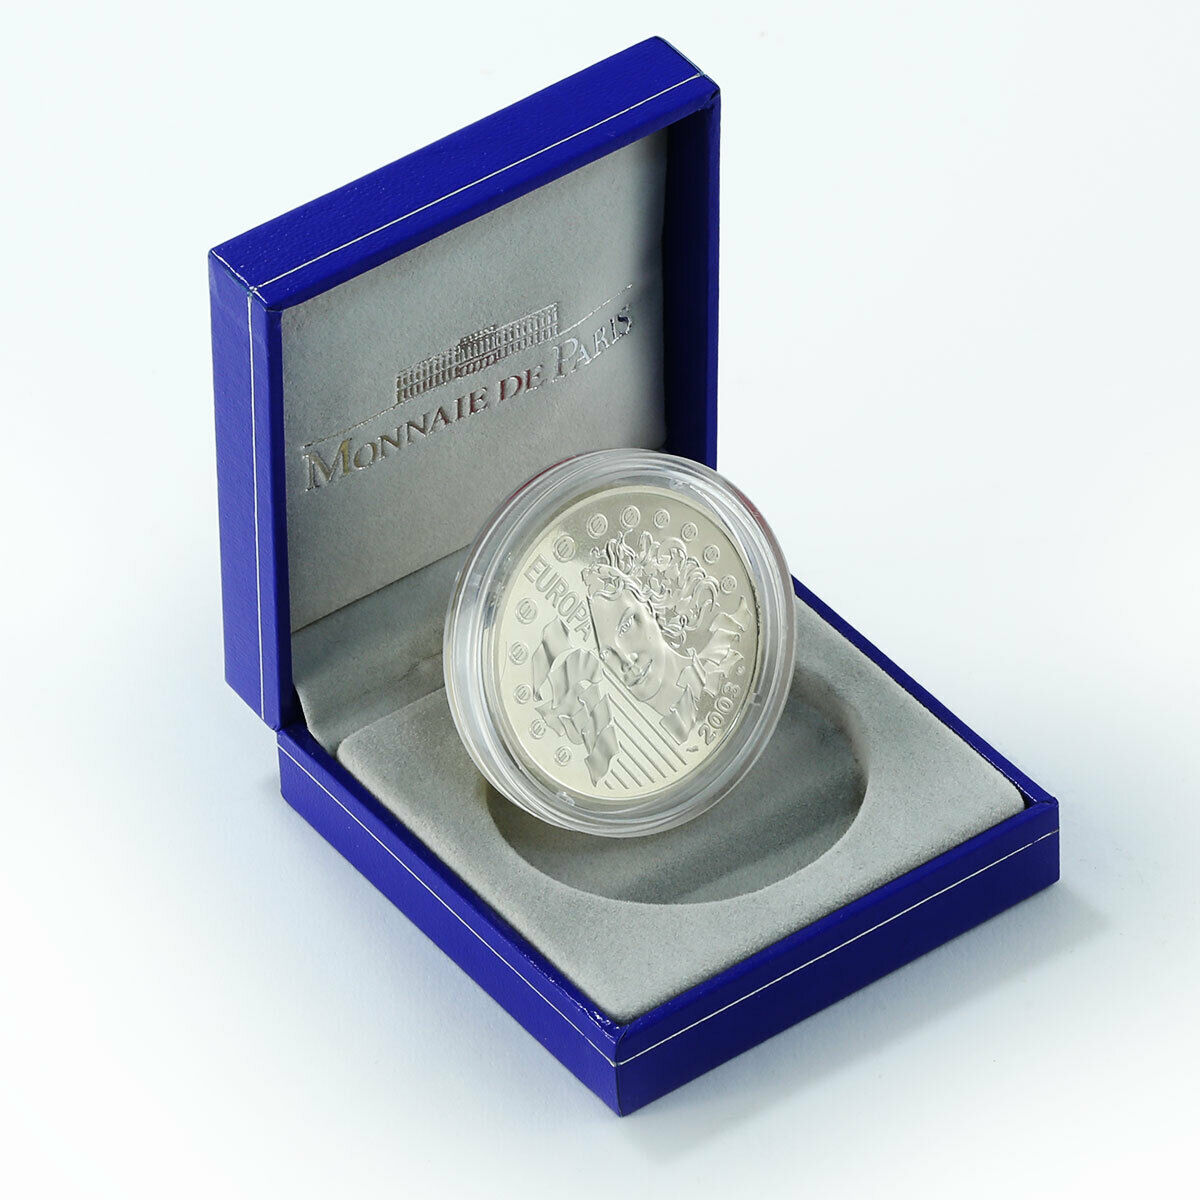 France 1½ Euro Introduction of the Euro silver coin 2003